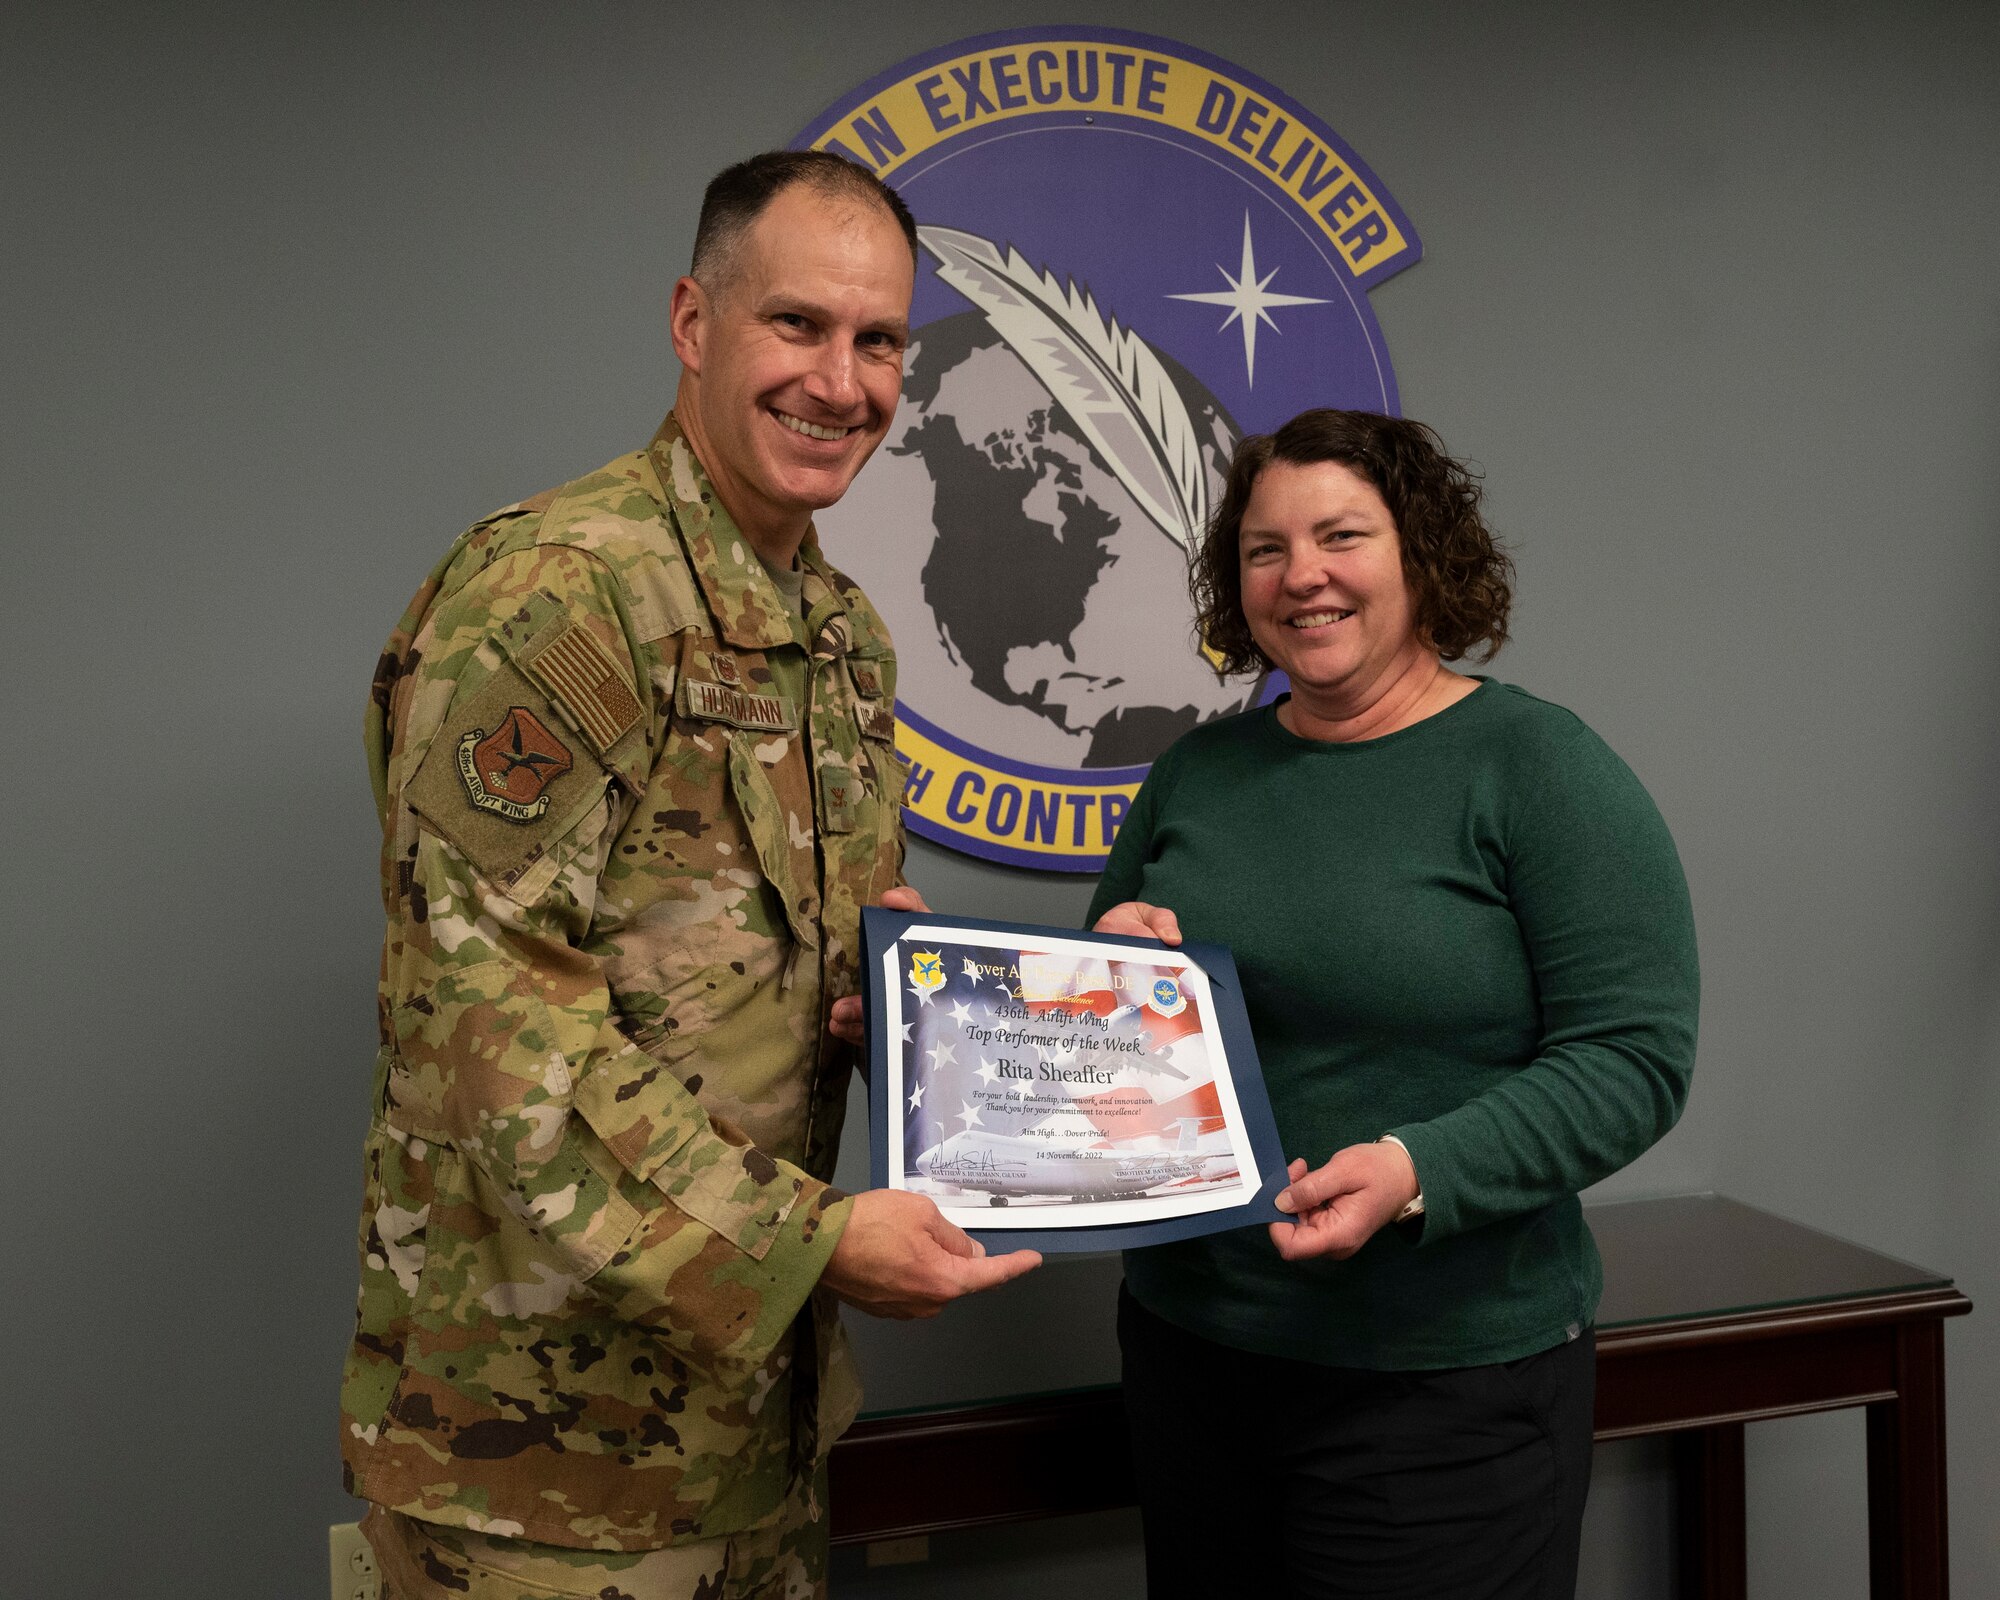 Col. Matt Husemann, left, 436th Airlift Wing commander, presents Rita Sheaffer, right, 436th Contracting Squadron administrative assistant, with a certificate recognizing her as the 436th AW Top Performer of the Week on Dover Air Force Base, Delaware, Dec. 5, 2022. Sheaffer was nominated for this award for her outstanding performance by her co-workers at the 436th CONS. (U.S. Air Force photo by Airman 1st Class Amanda Jett)